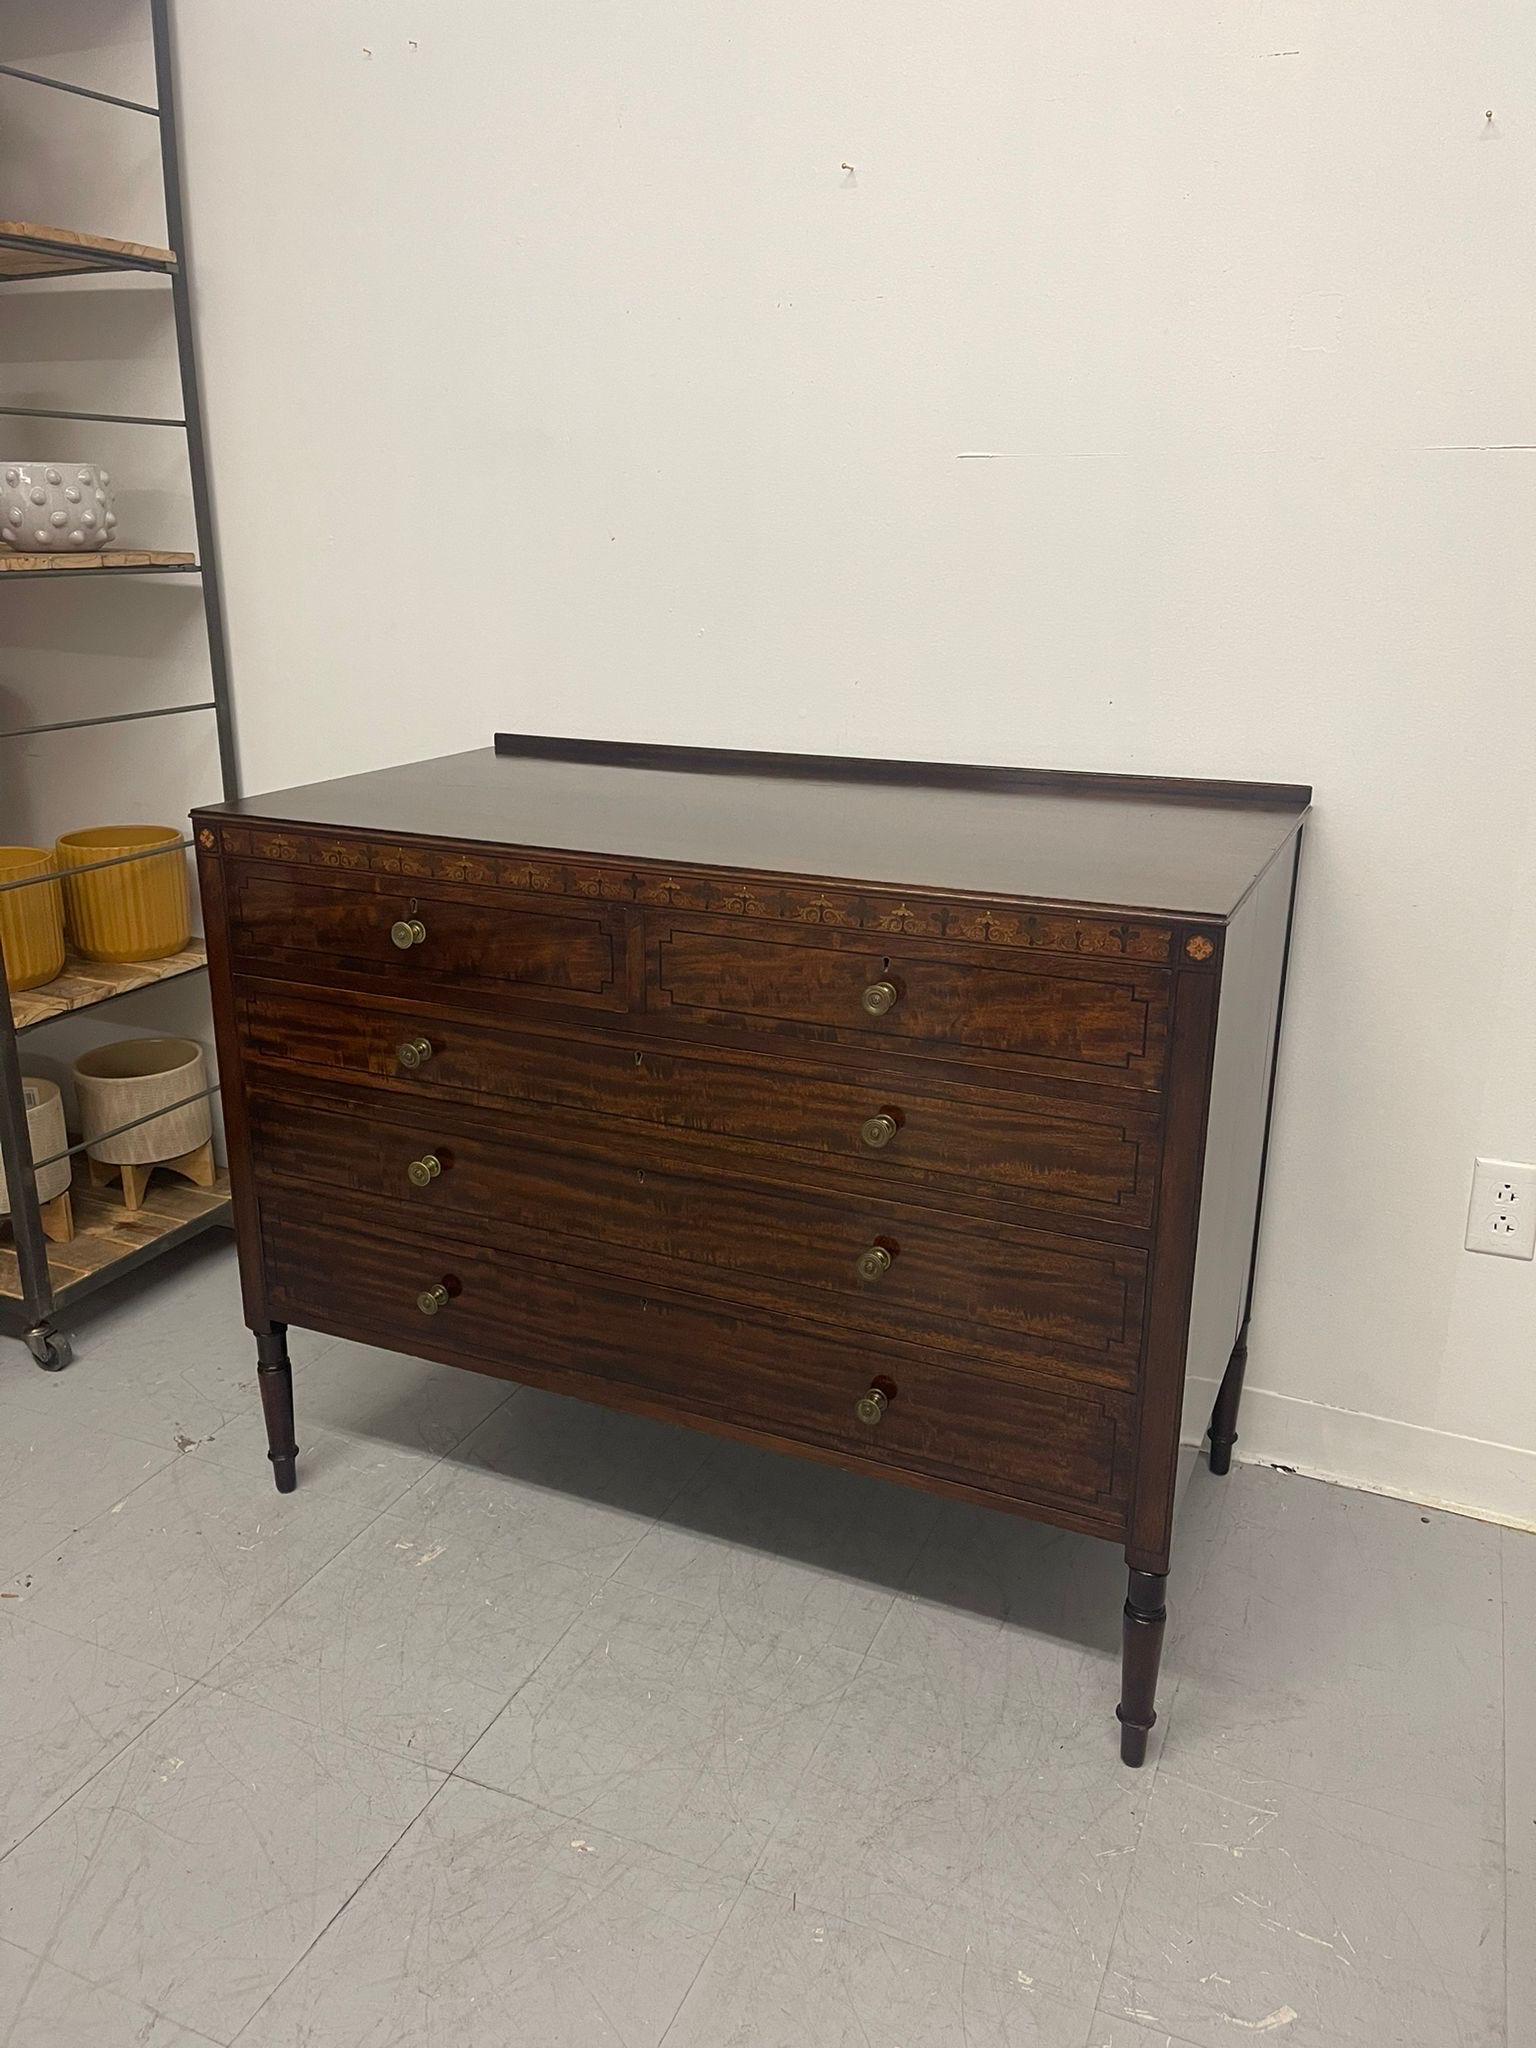 Mid-Century Modern Antique Edwardian Dresser With Wood Inlay Uk Import. Circa 1905 For Sale